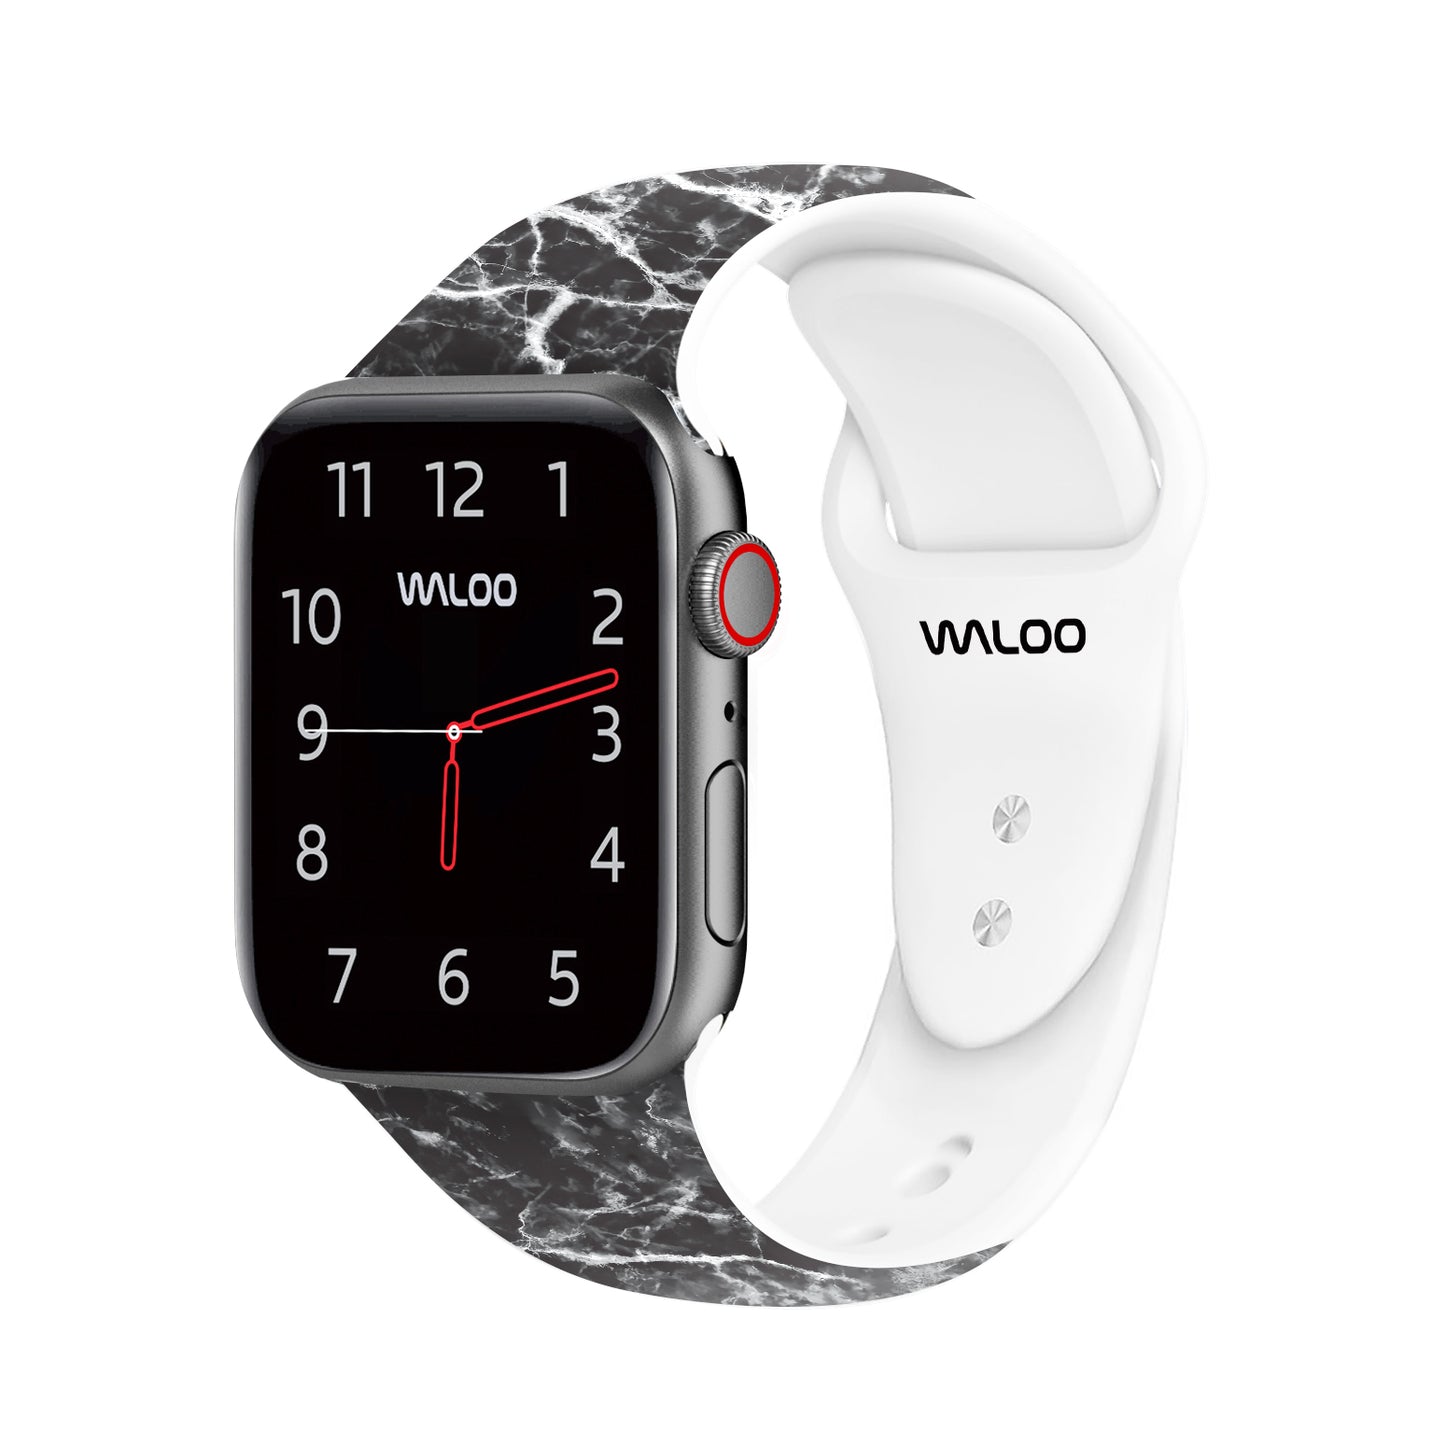 Waloo Marble Silicone Sport Band For Apple Watch